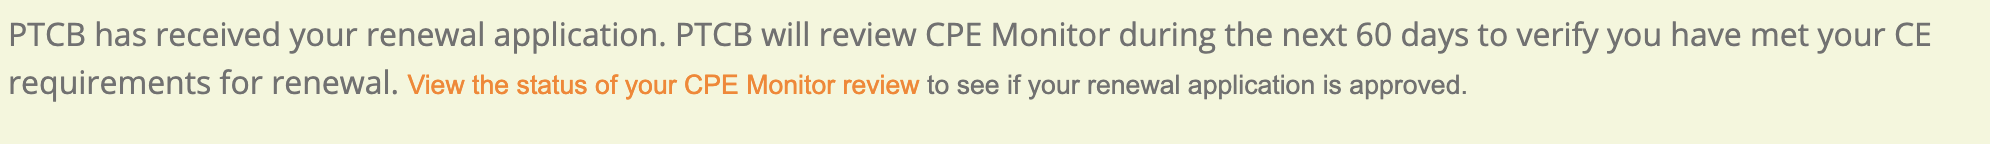 CPE_Monitor_check_link_from_alert.png